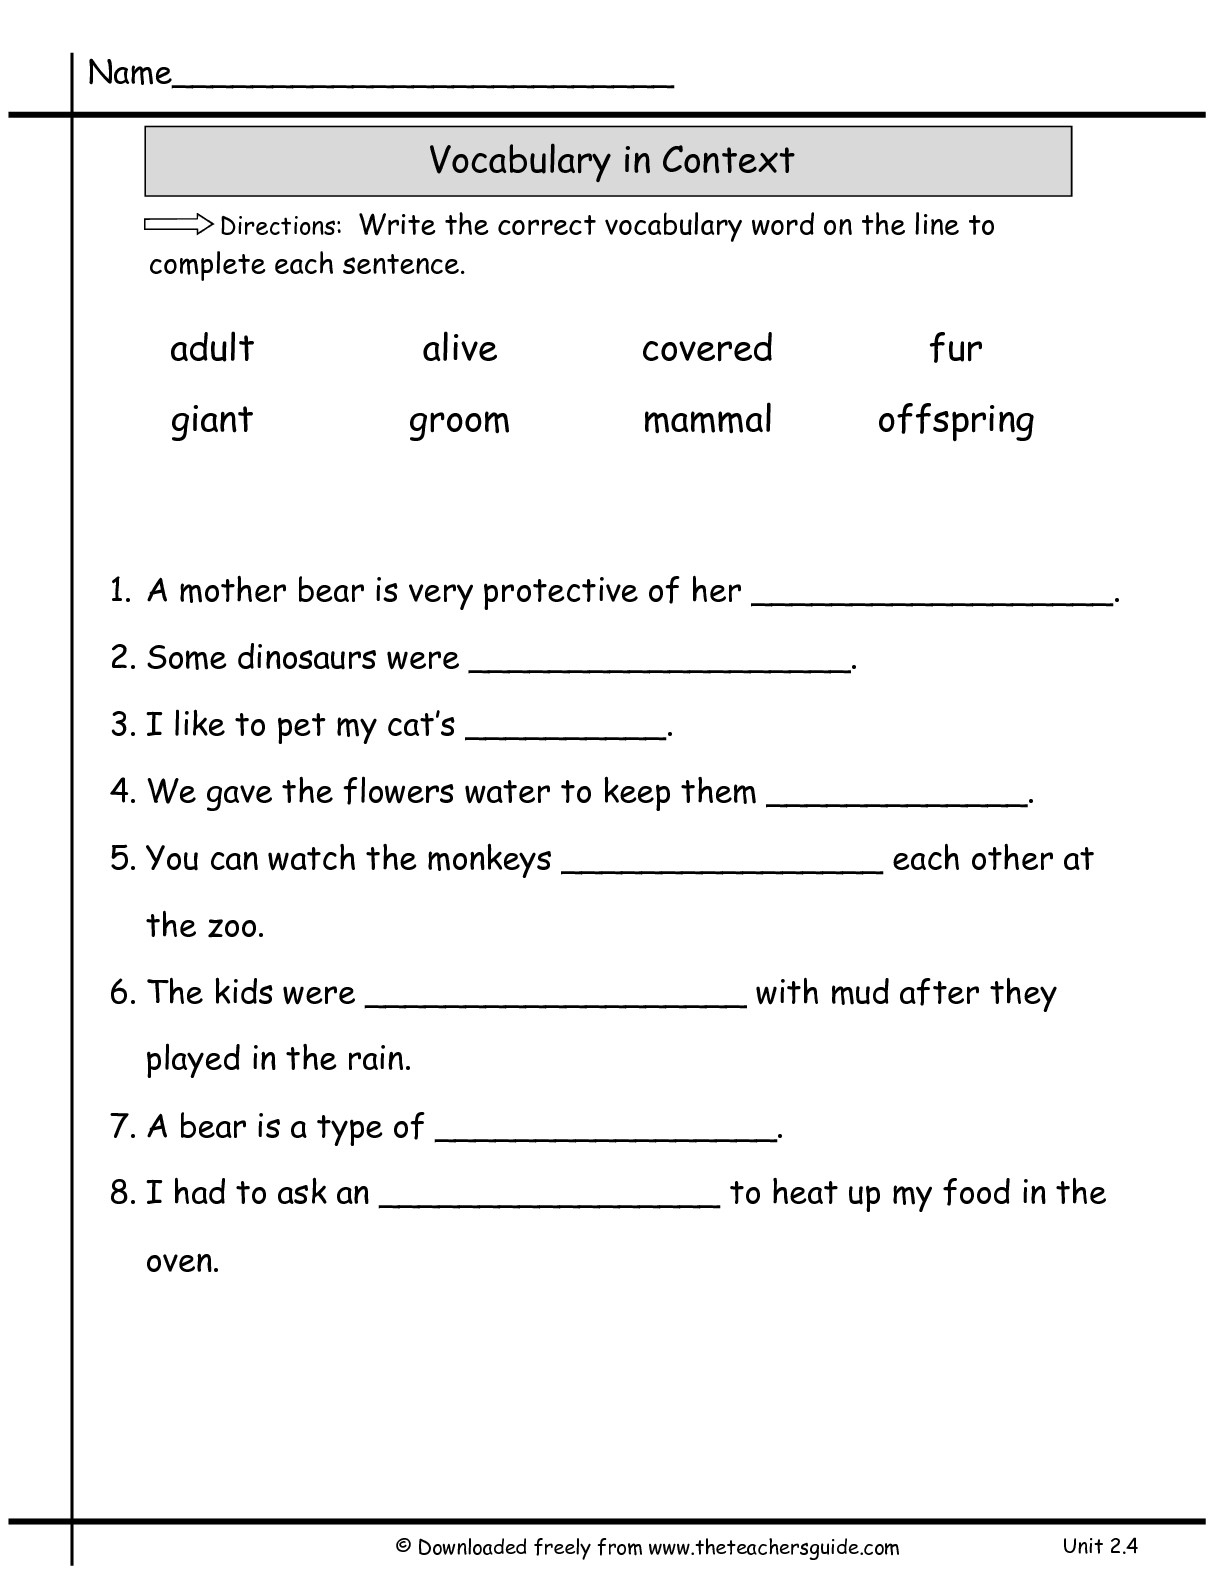 Free Second Grade Science Worksheets For Learning - Math Worksheet | Printable Science Worksheets For 2Nd Grade